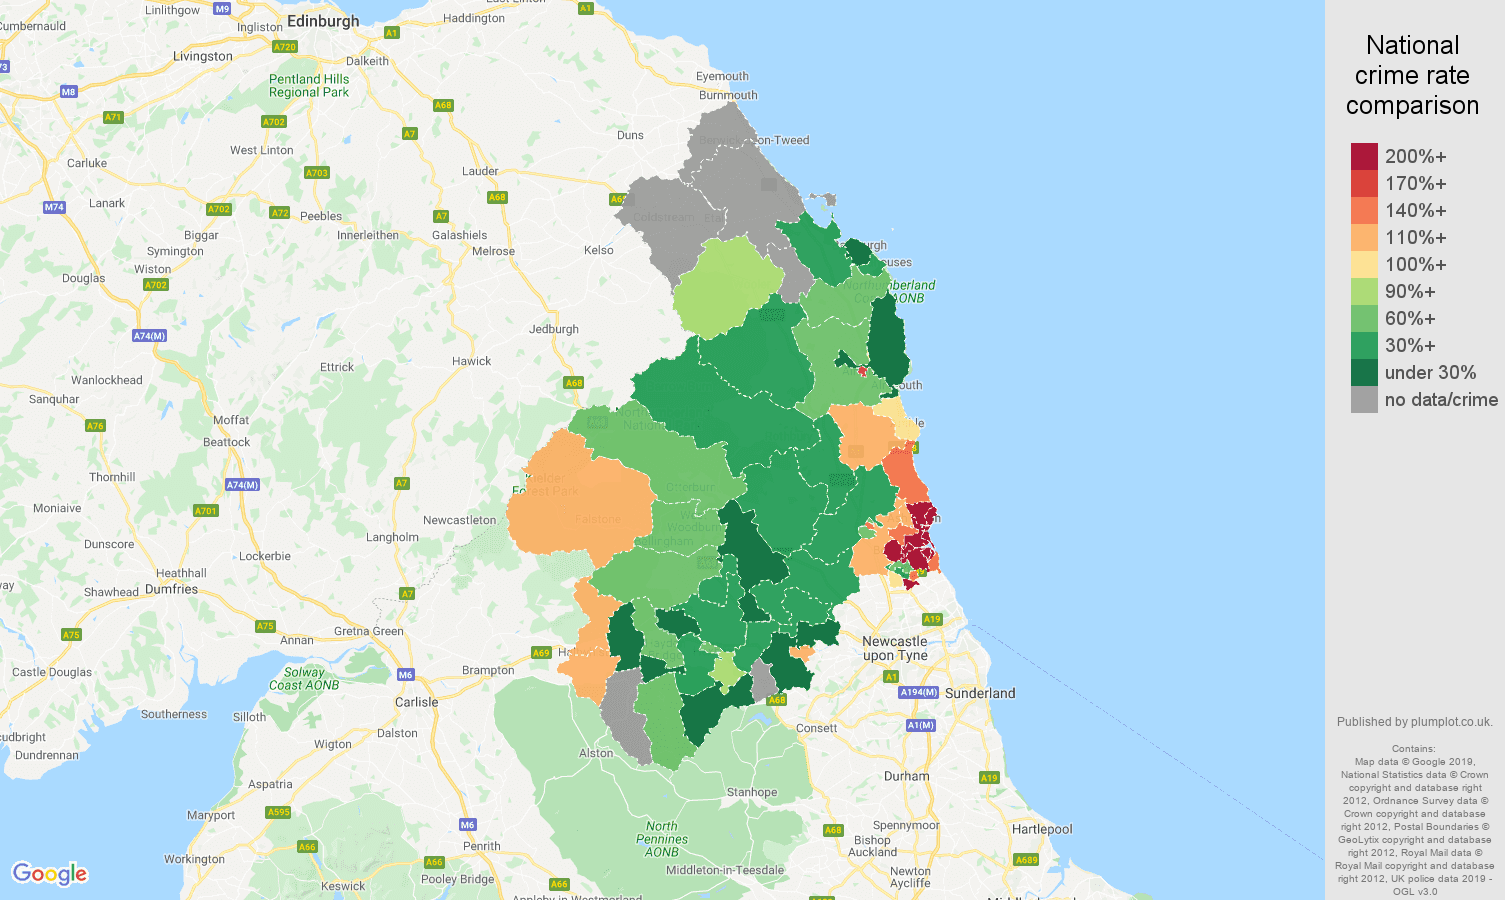 Northumberland public order crime rate comparison map